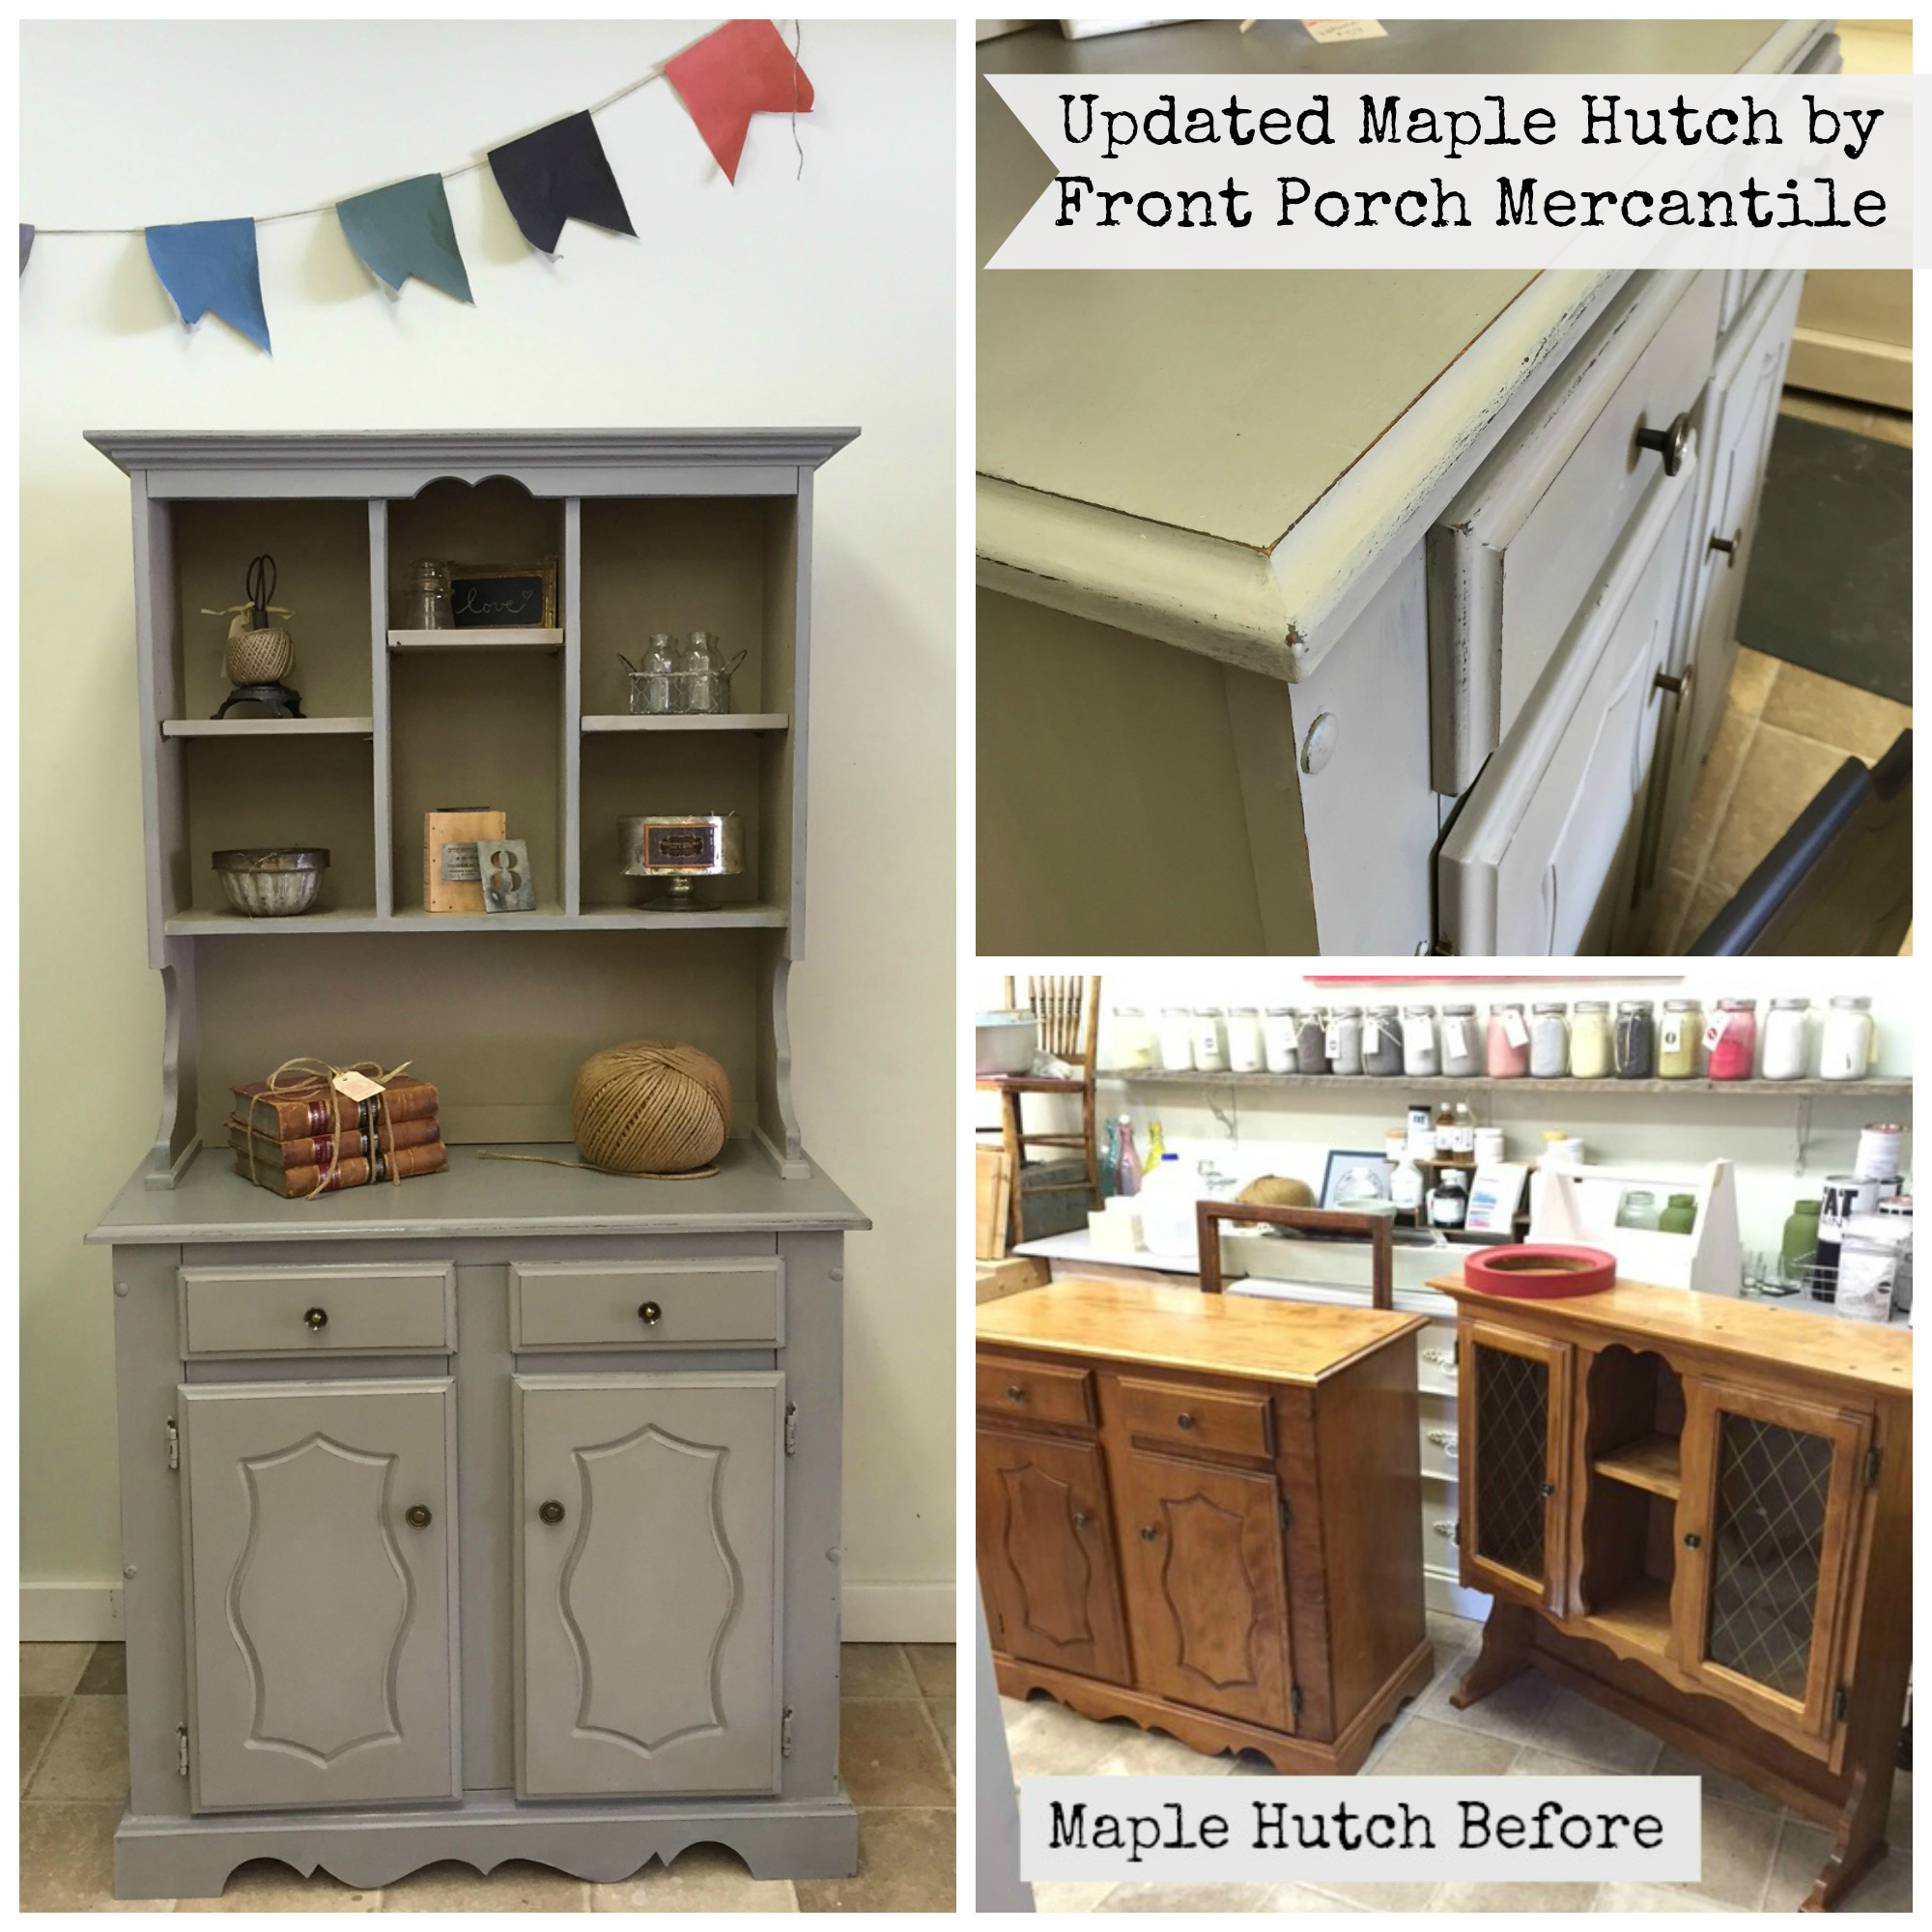 Maple Hutch updated with MMS Schloss Front Porch Mercantile